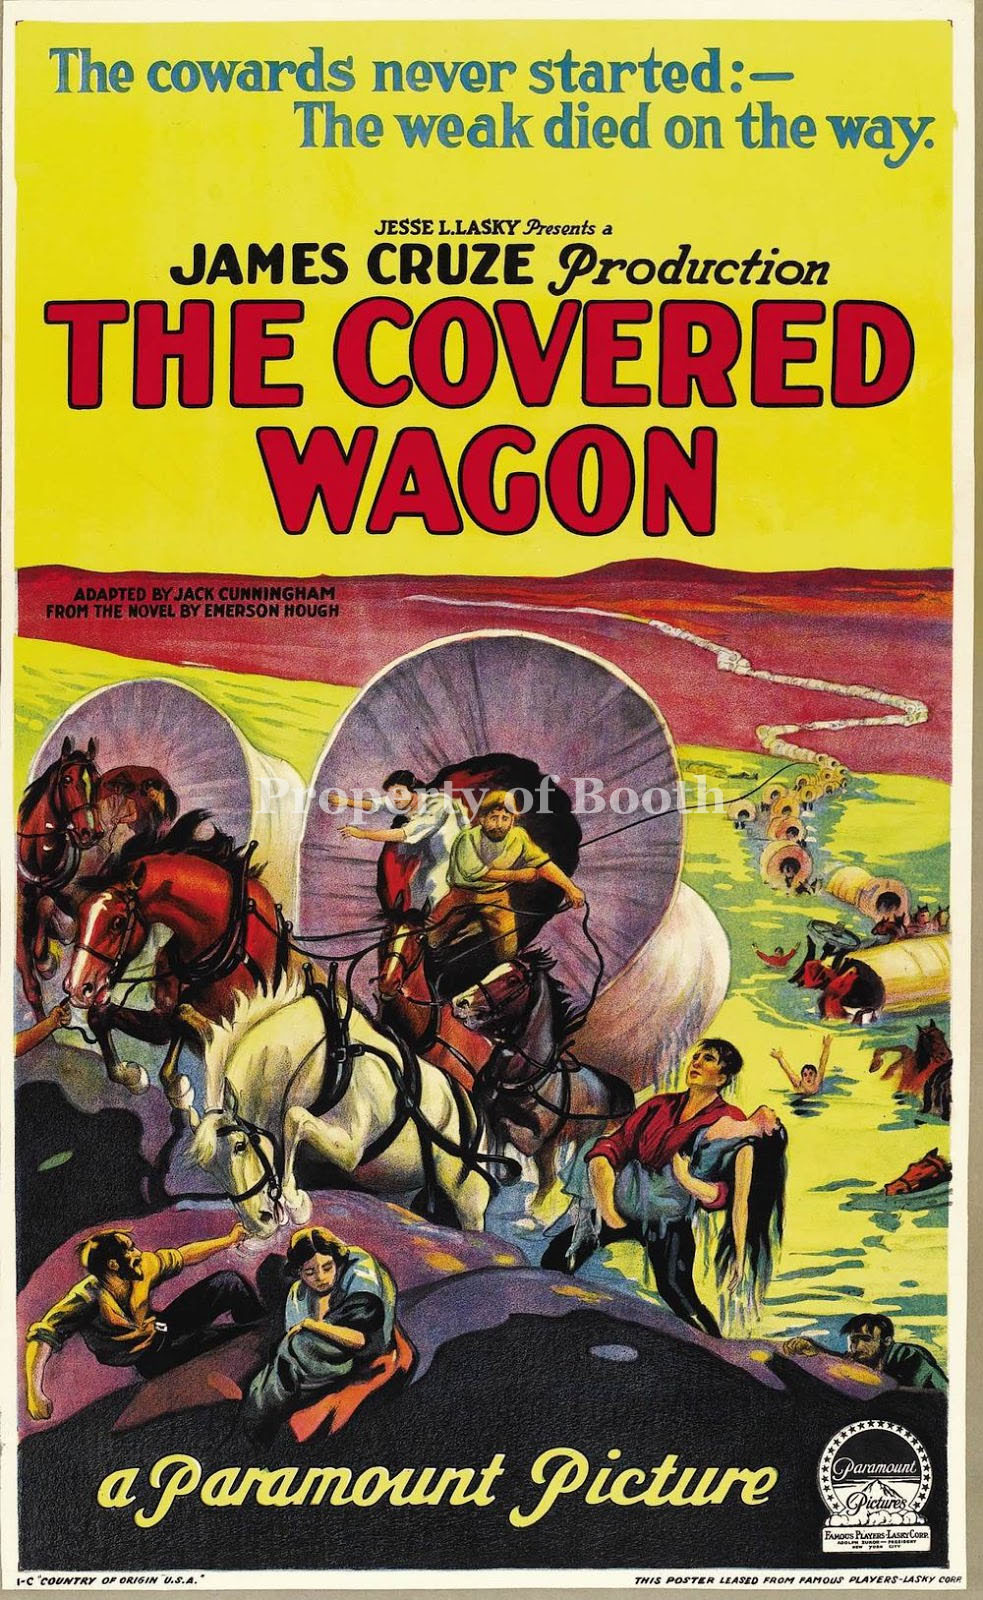 1923, The Covered Wagon, 48 x 34"